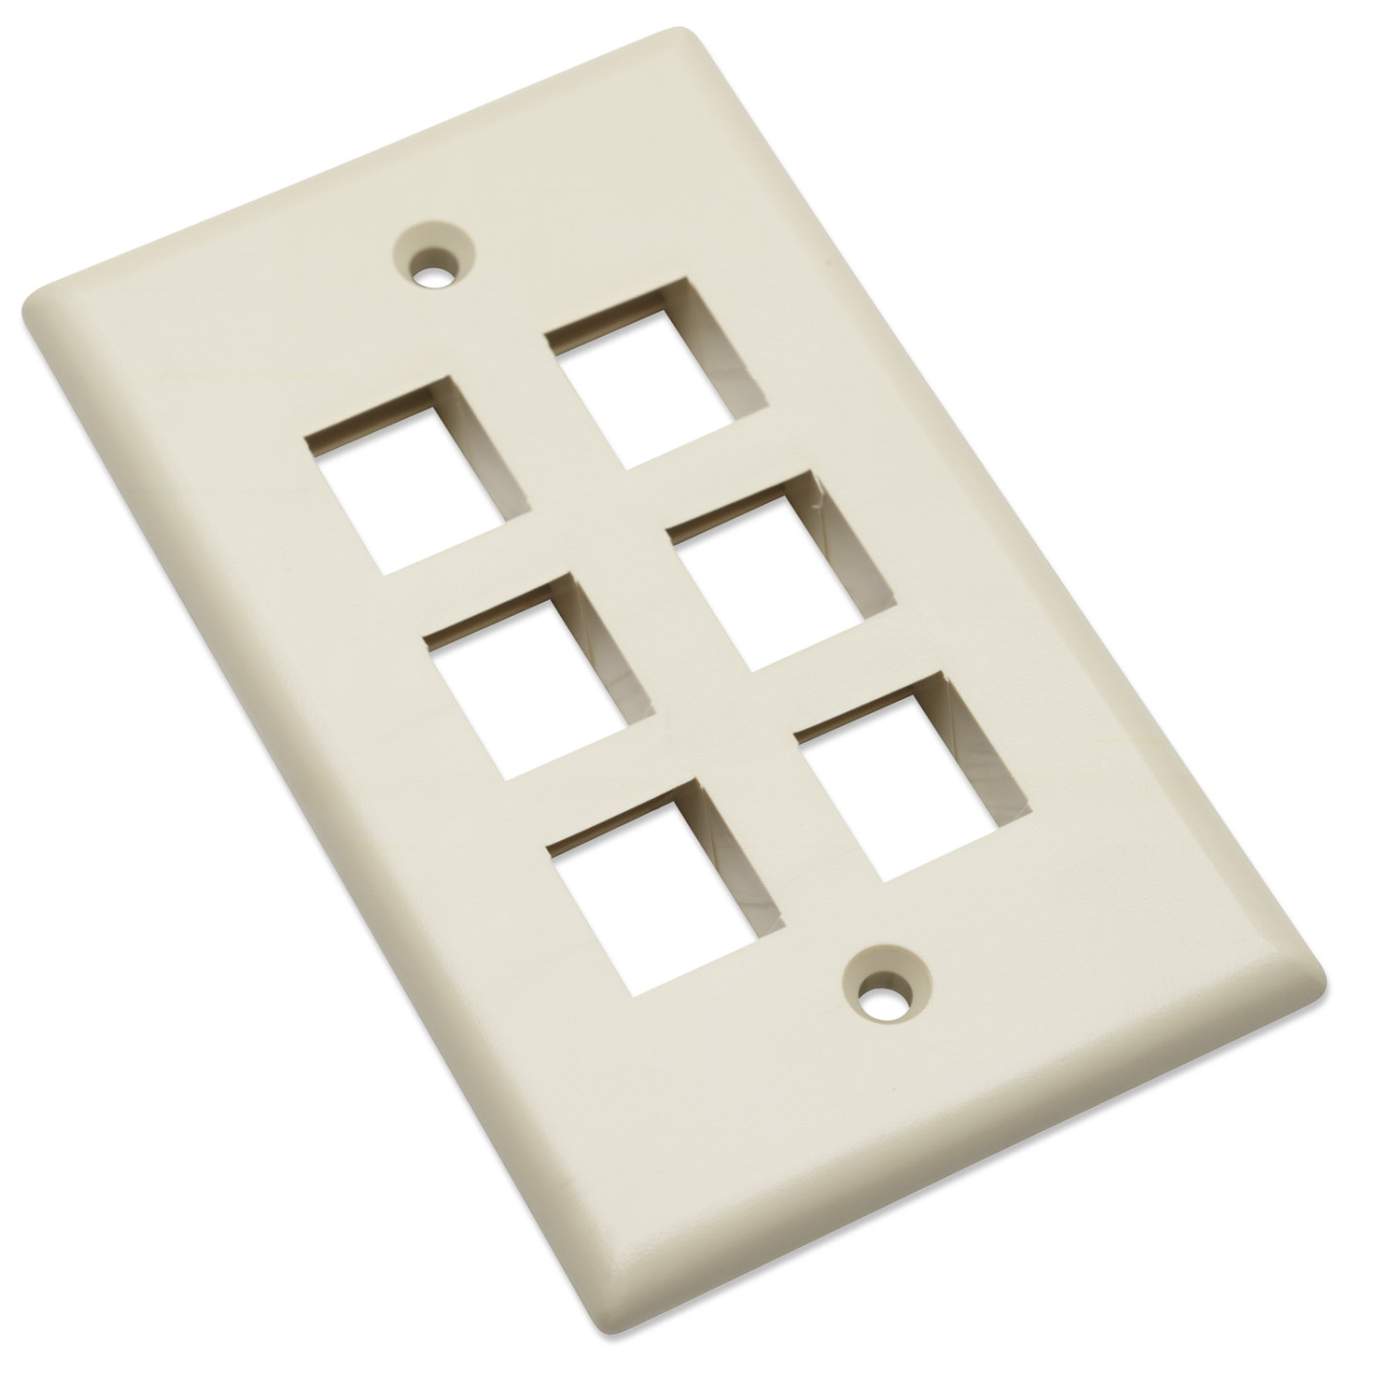 6-Outlet Keystone Wall Plate Image 2